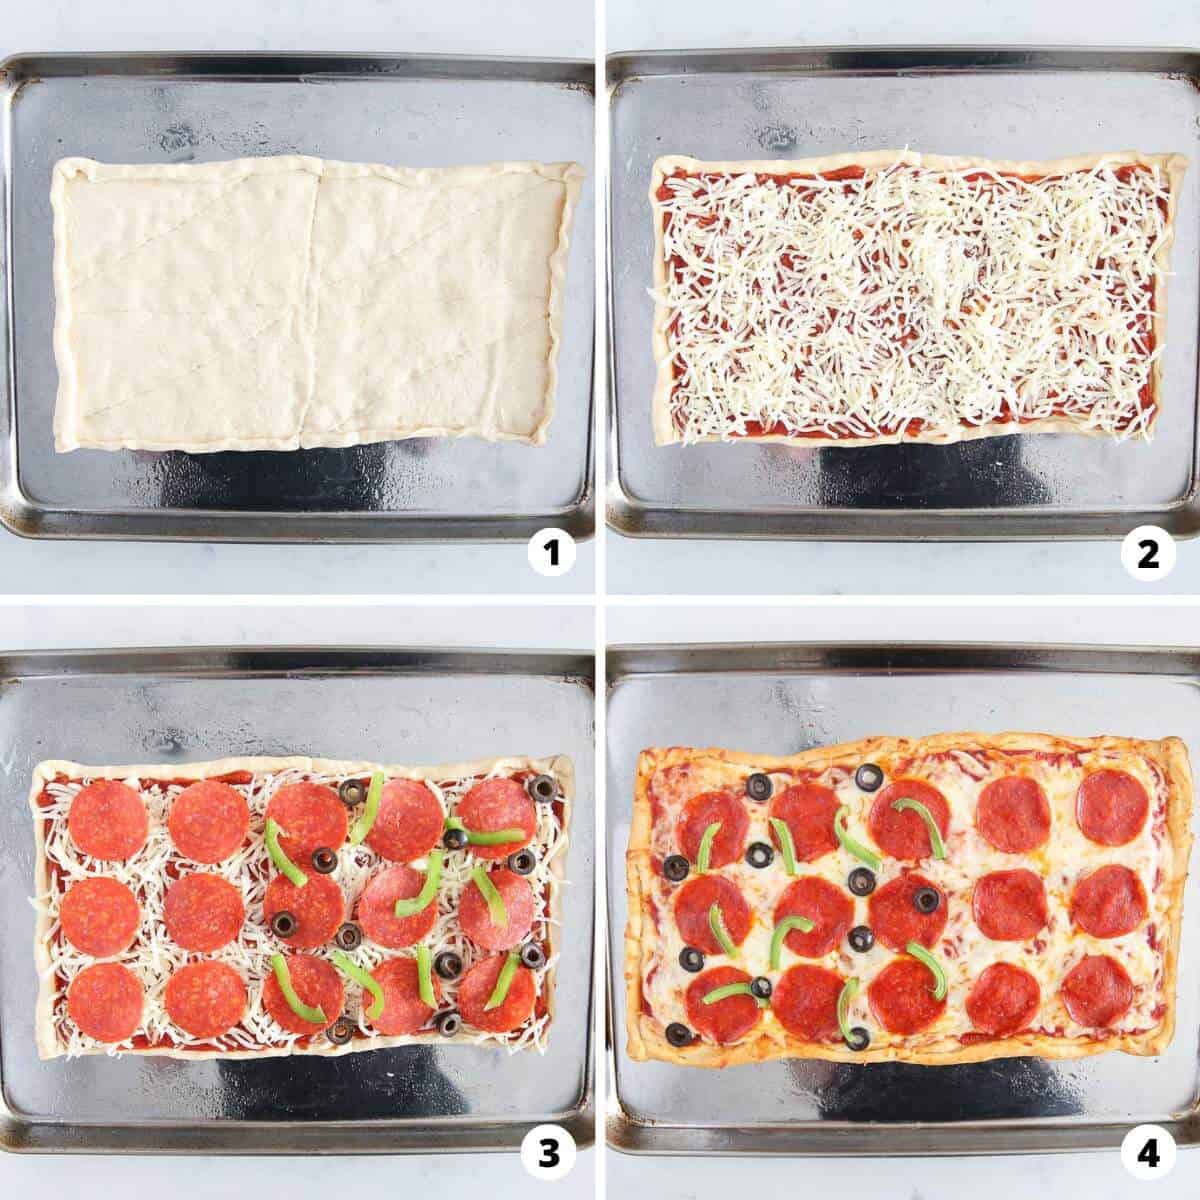 Showing how to make crescent roll pizza in a 4 step collage.